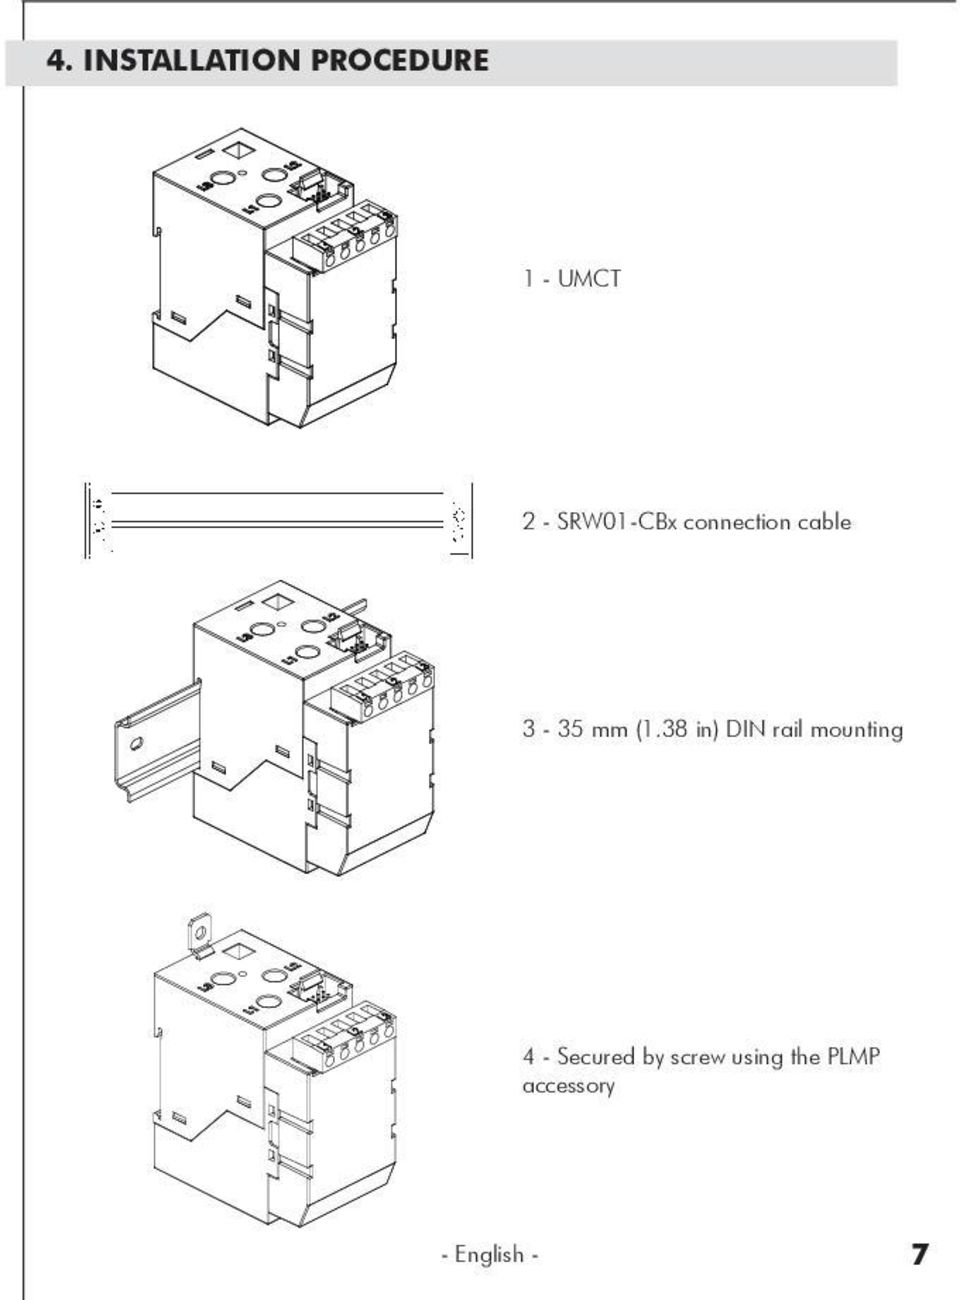 38 in) DIN rail mounting 4 - Secured by